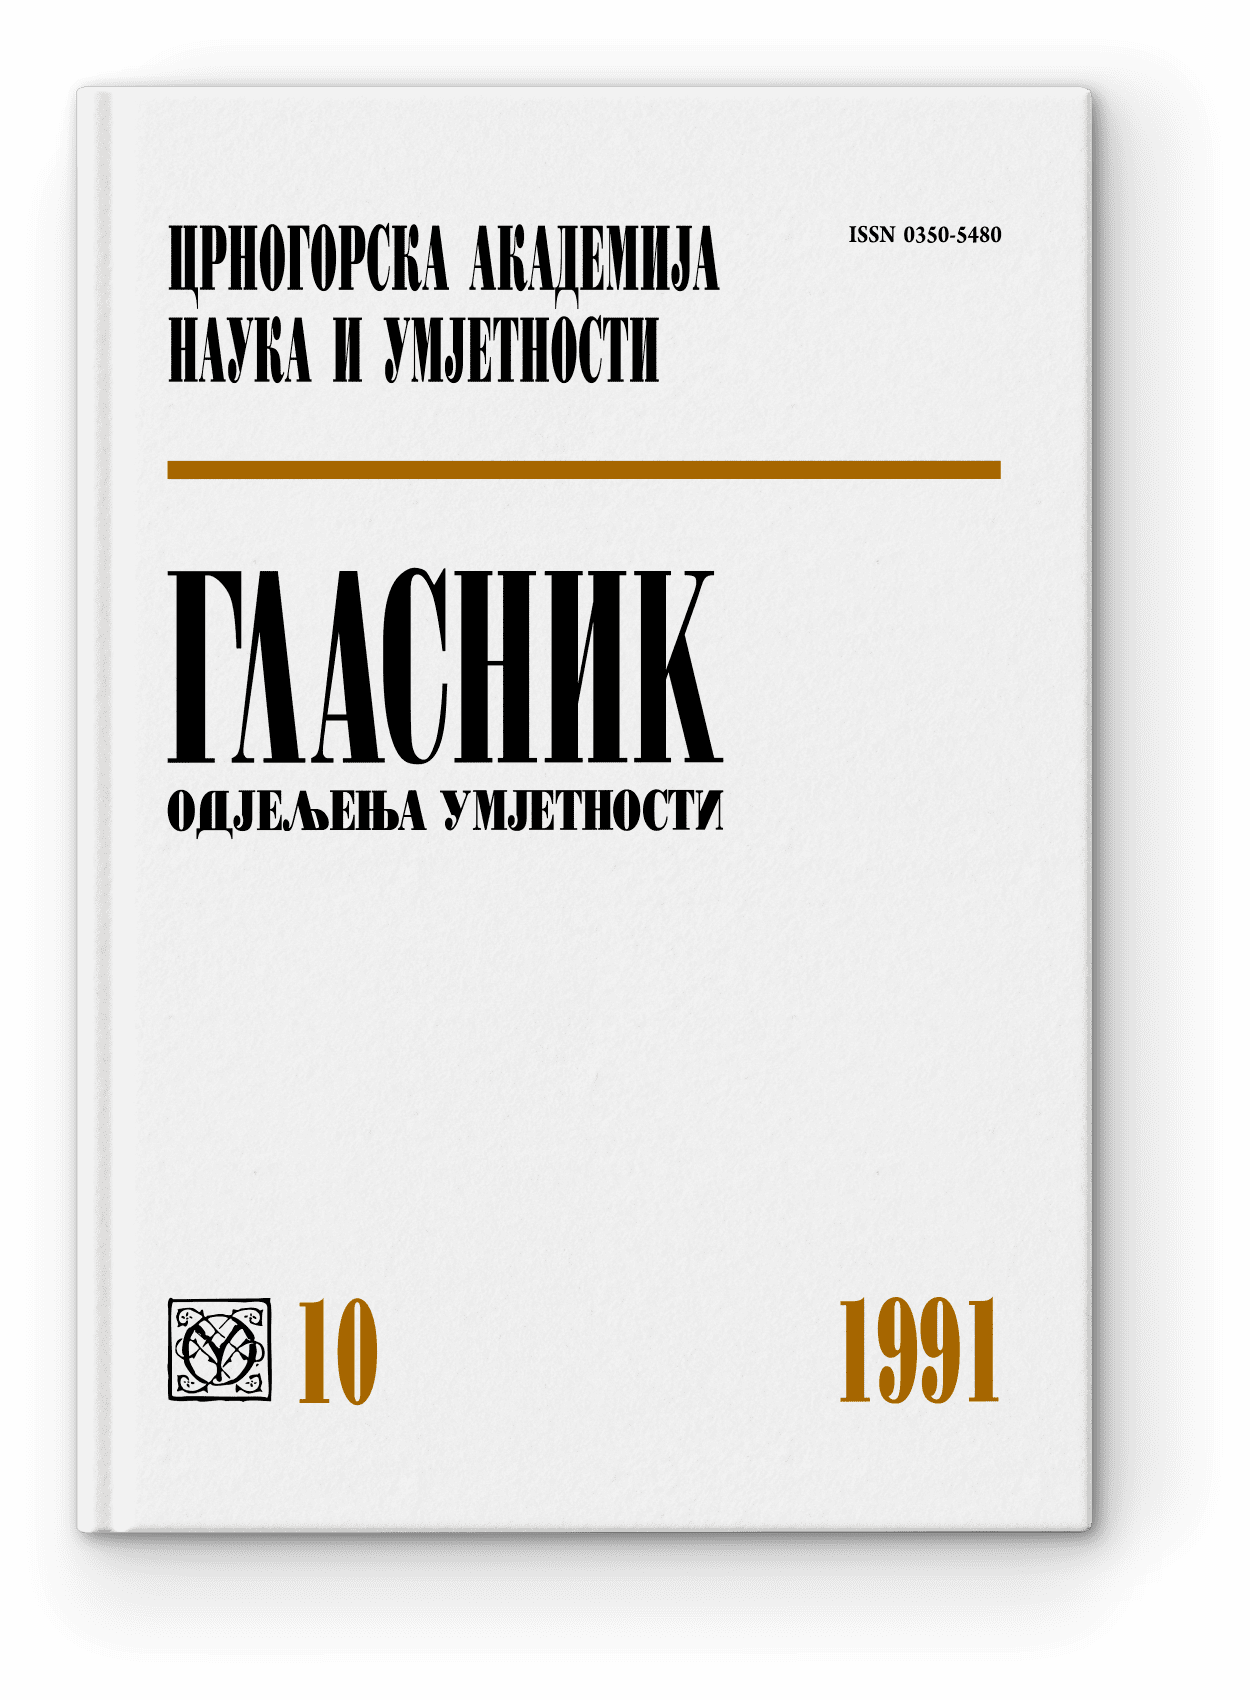 PROCEEDINGS OF THE DEPARTMENT OF ARTS, 10/1991